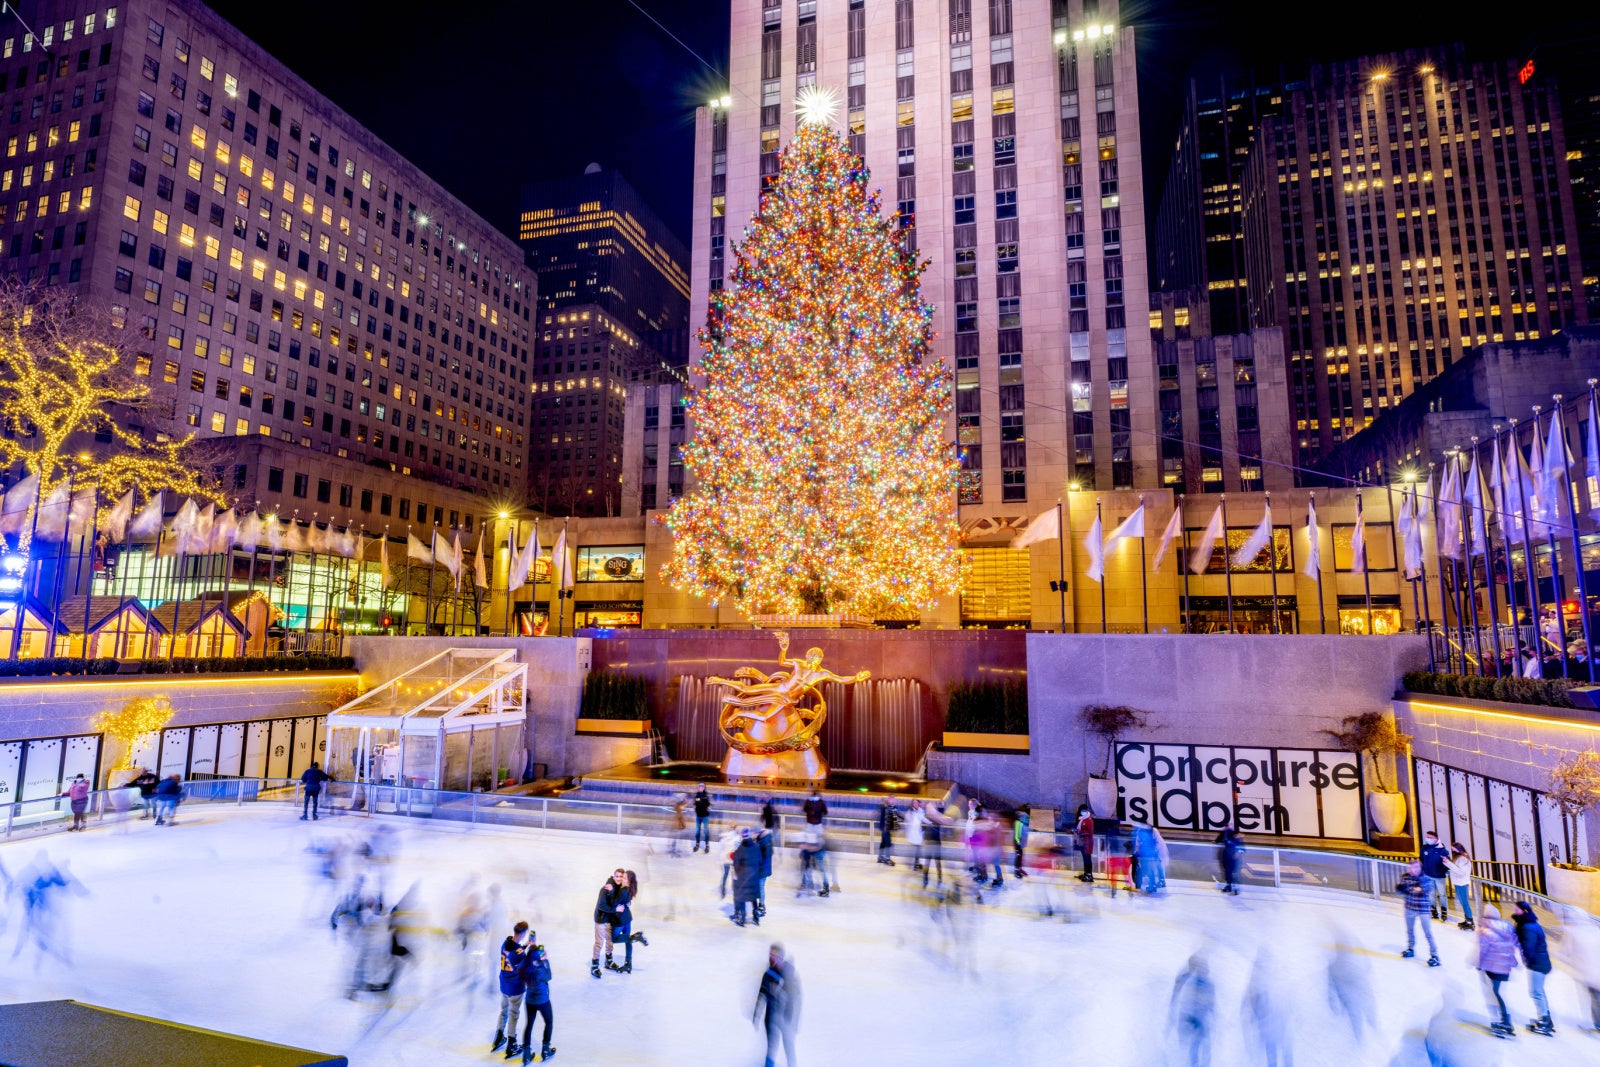 Rockefeller Center at Christmas. (Photo by Roy Rochlin/Getty Images)